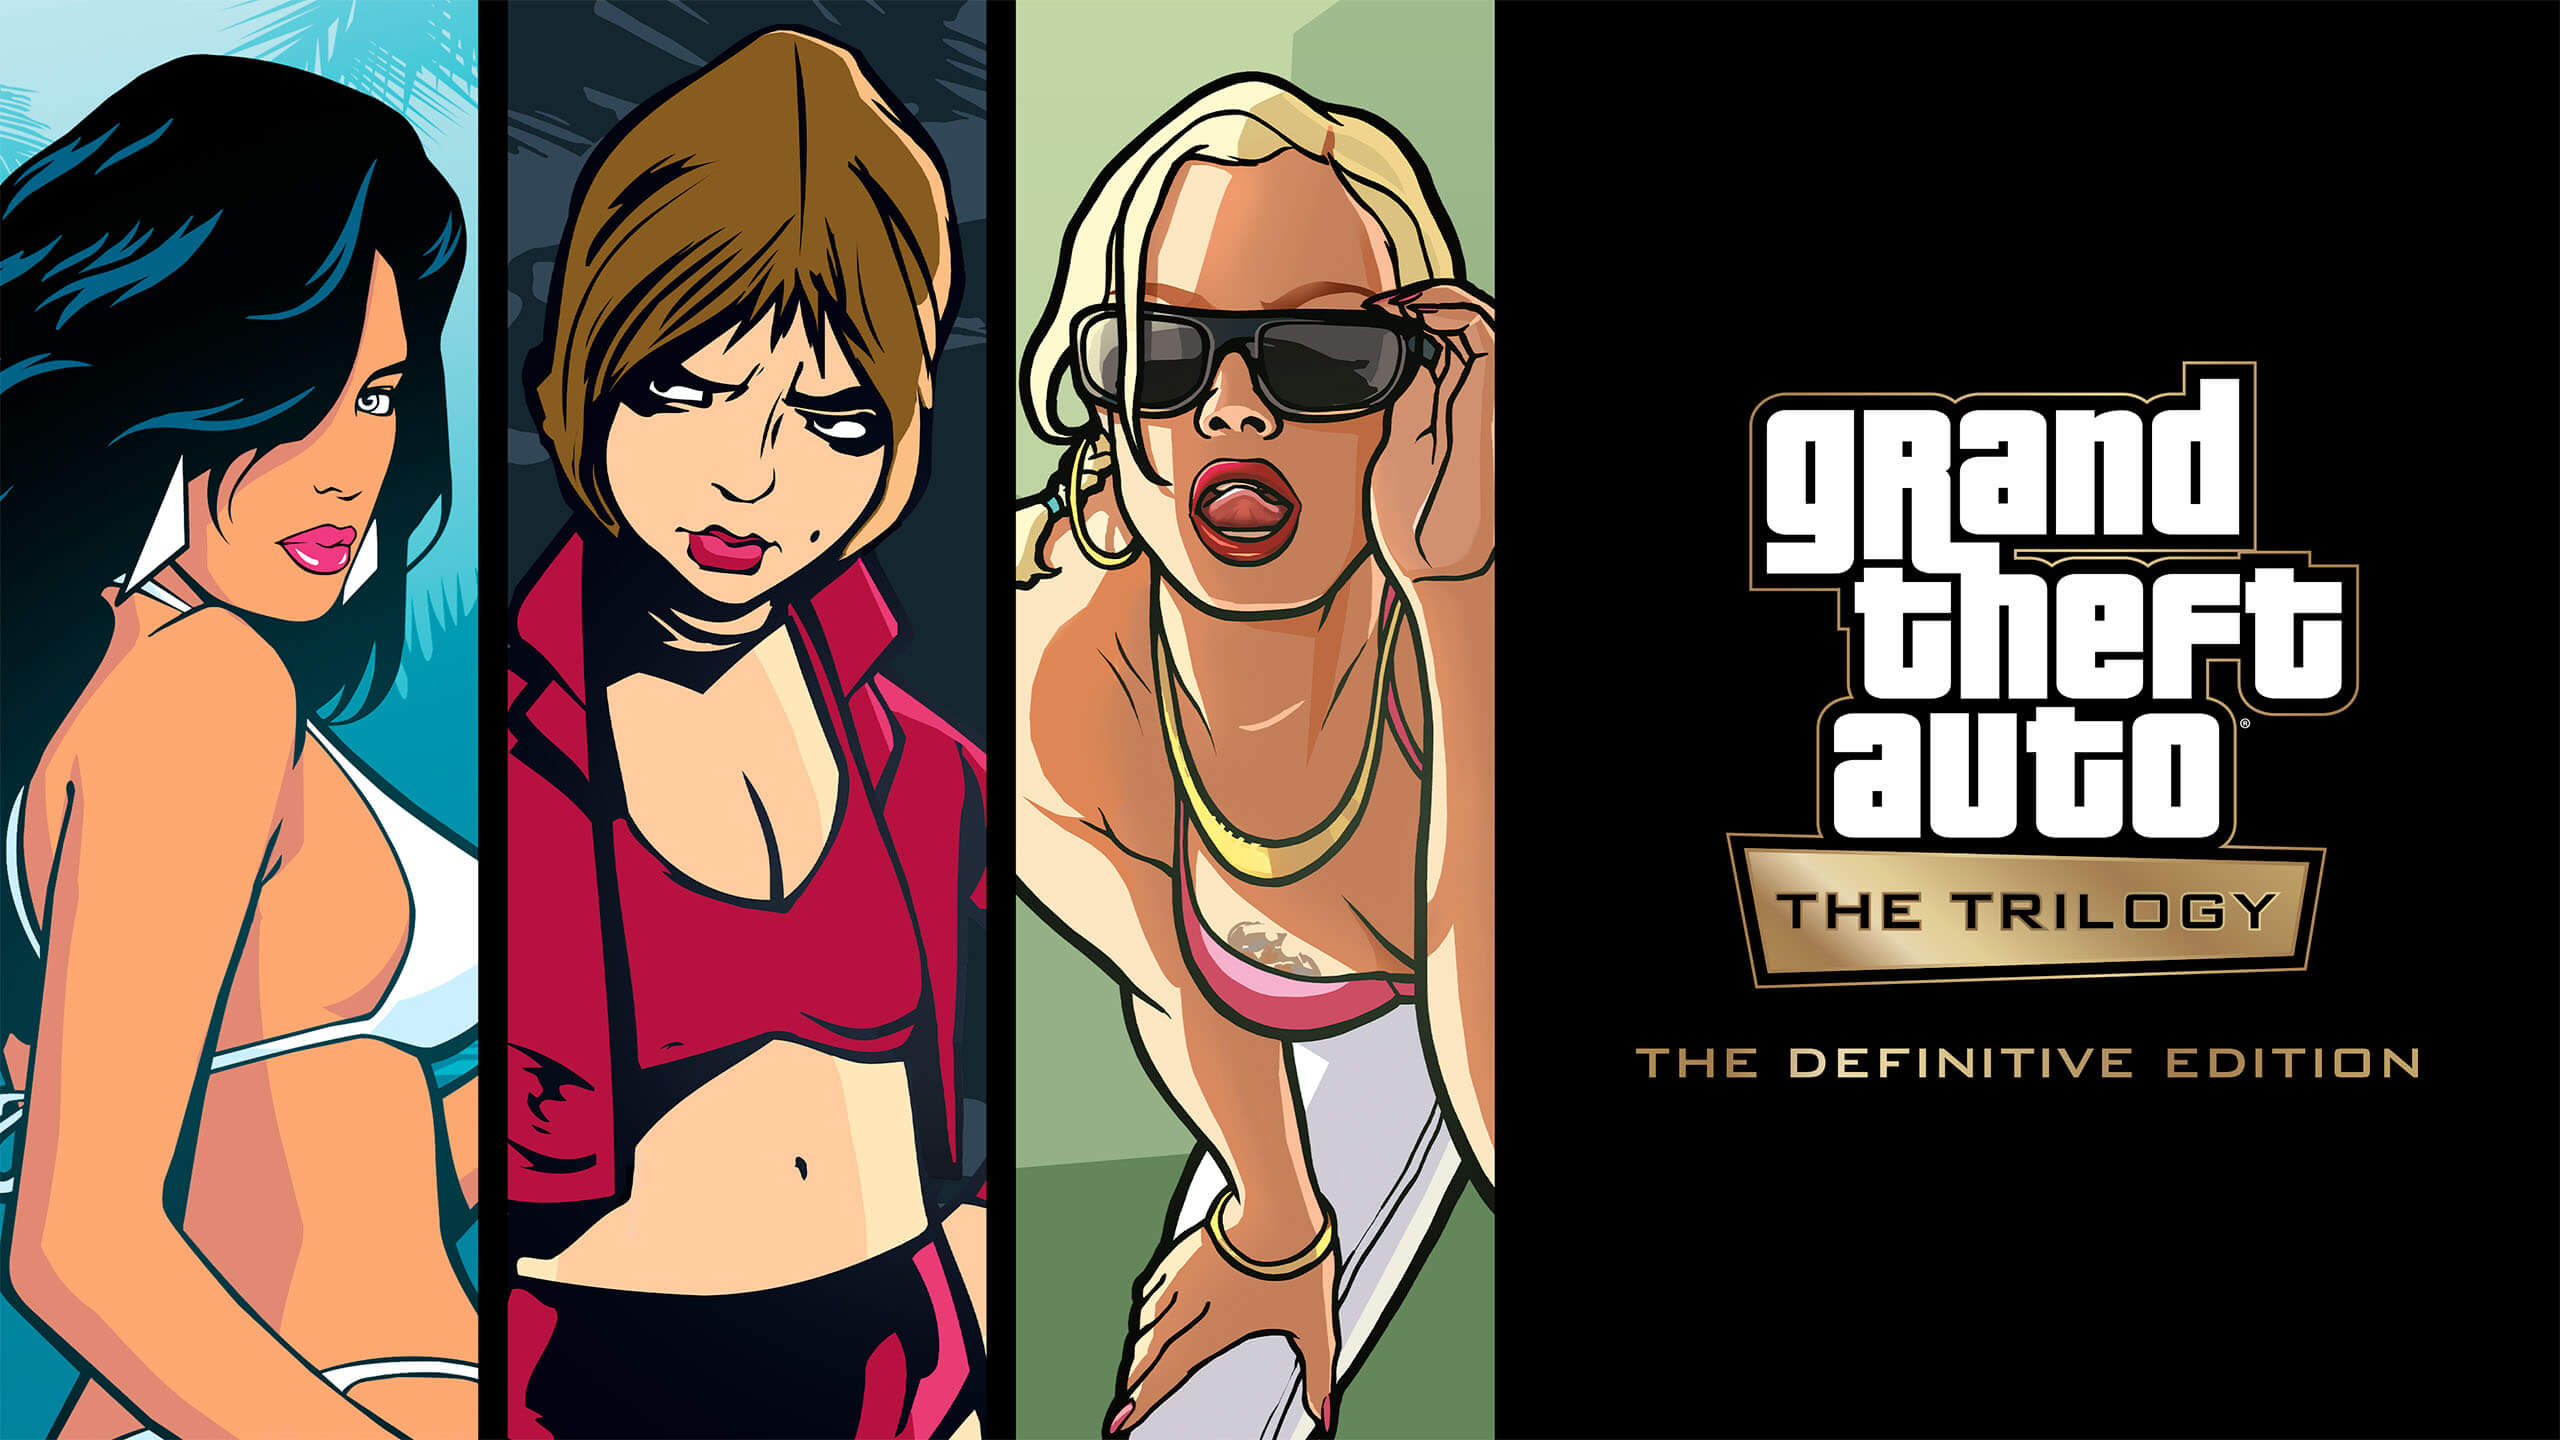 Grand Theft Auto: San Andreas – The Definitive Edition PS4 Version Full Game Free Download